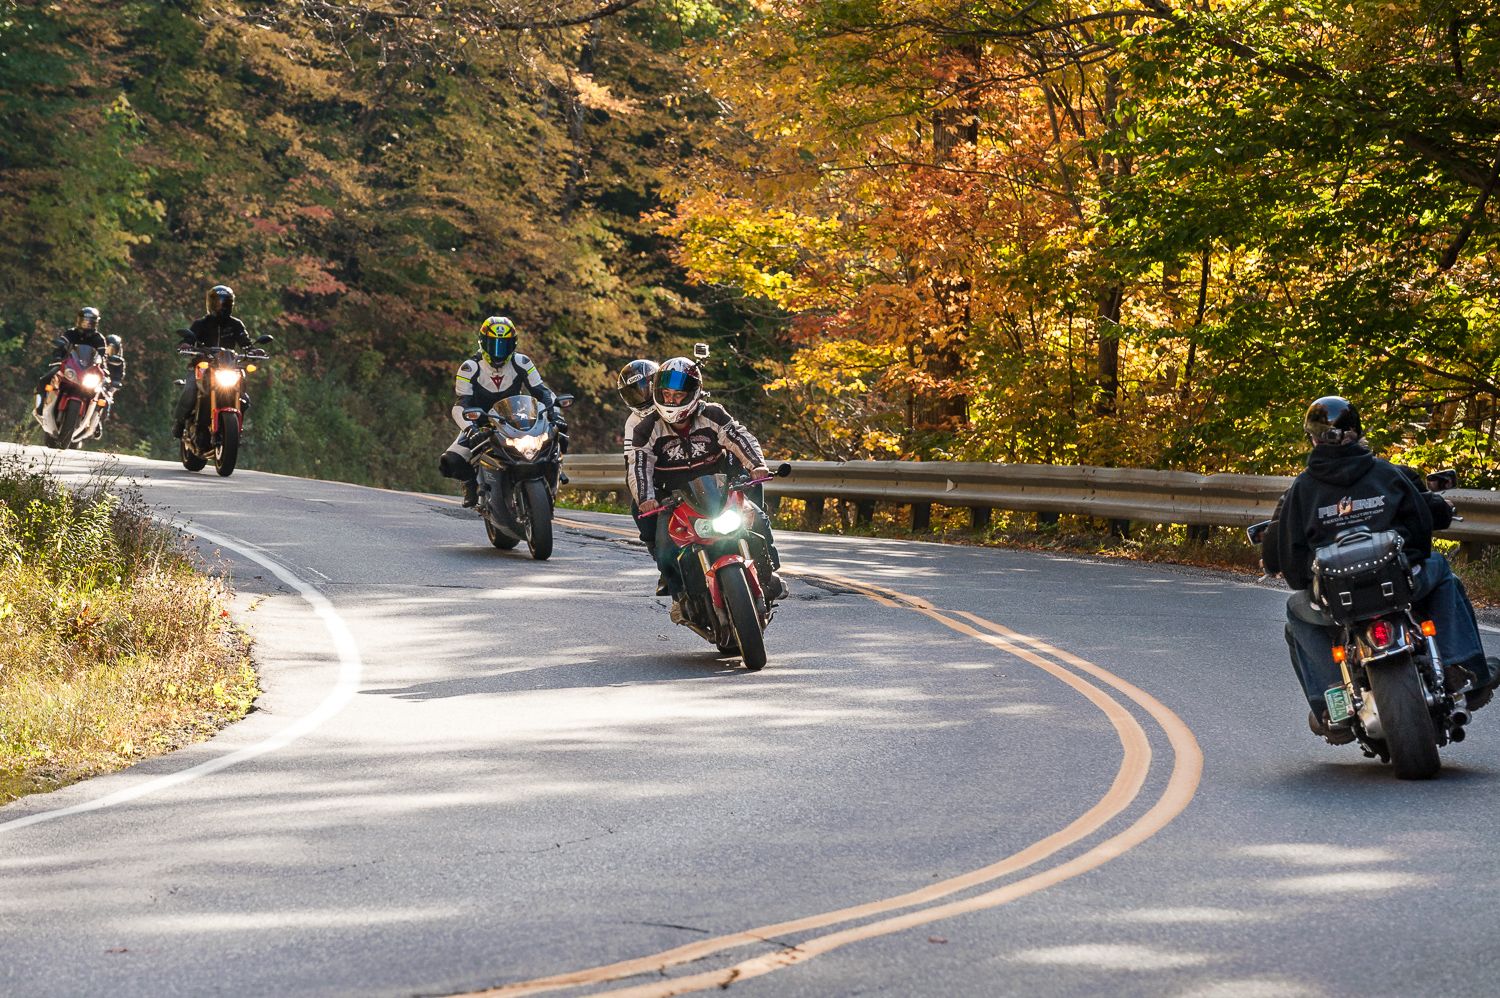  Motorcyclists ride through App Gap on a fall day VT 17 in Vermont. Photo by Bobbi LoCicero 